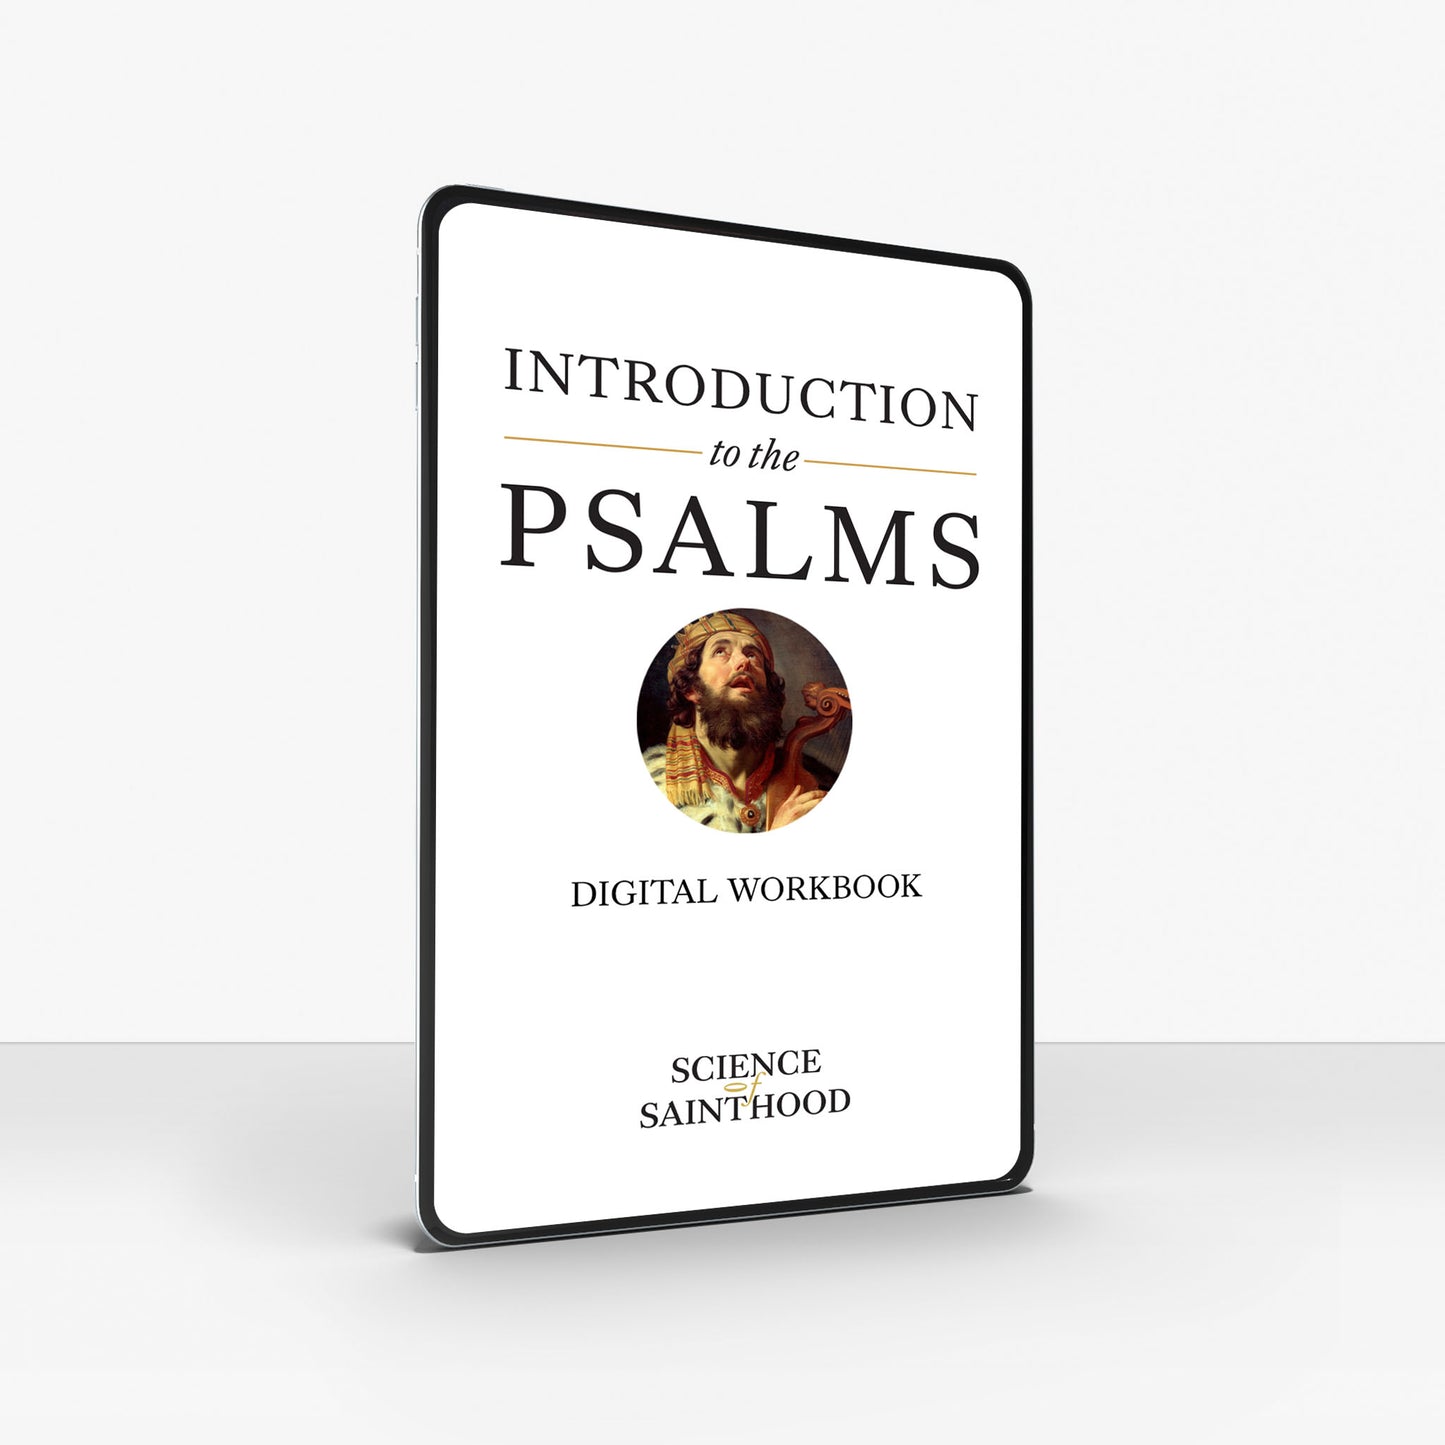 Interactive Digital Workbook - Introduction to the Psalms